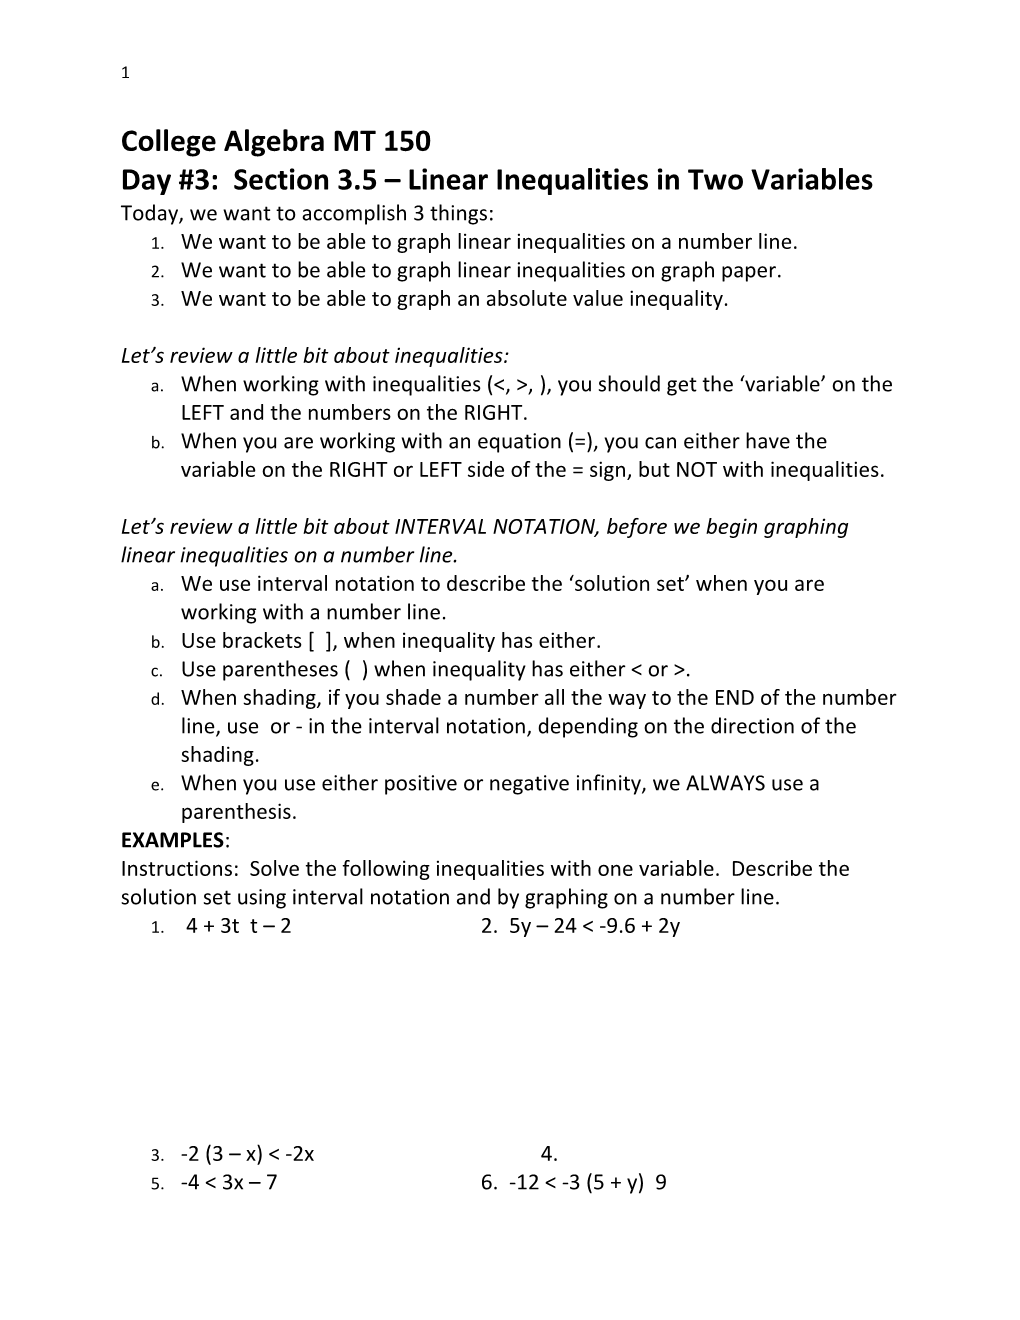 Day #3: Section 3.5 Linear Inequalities in Two Variables